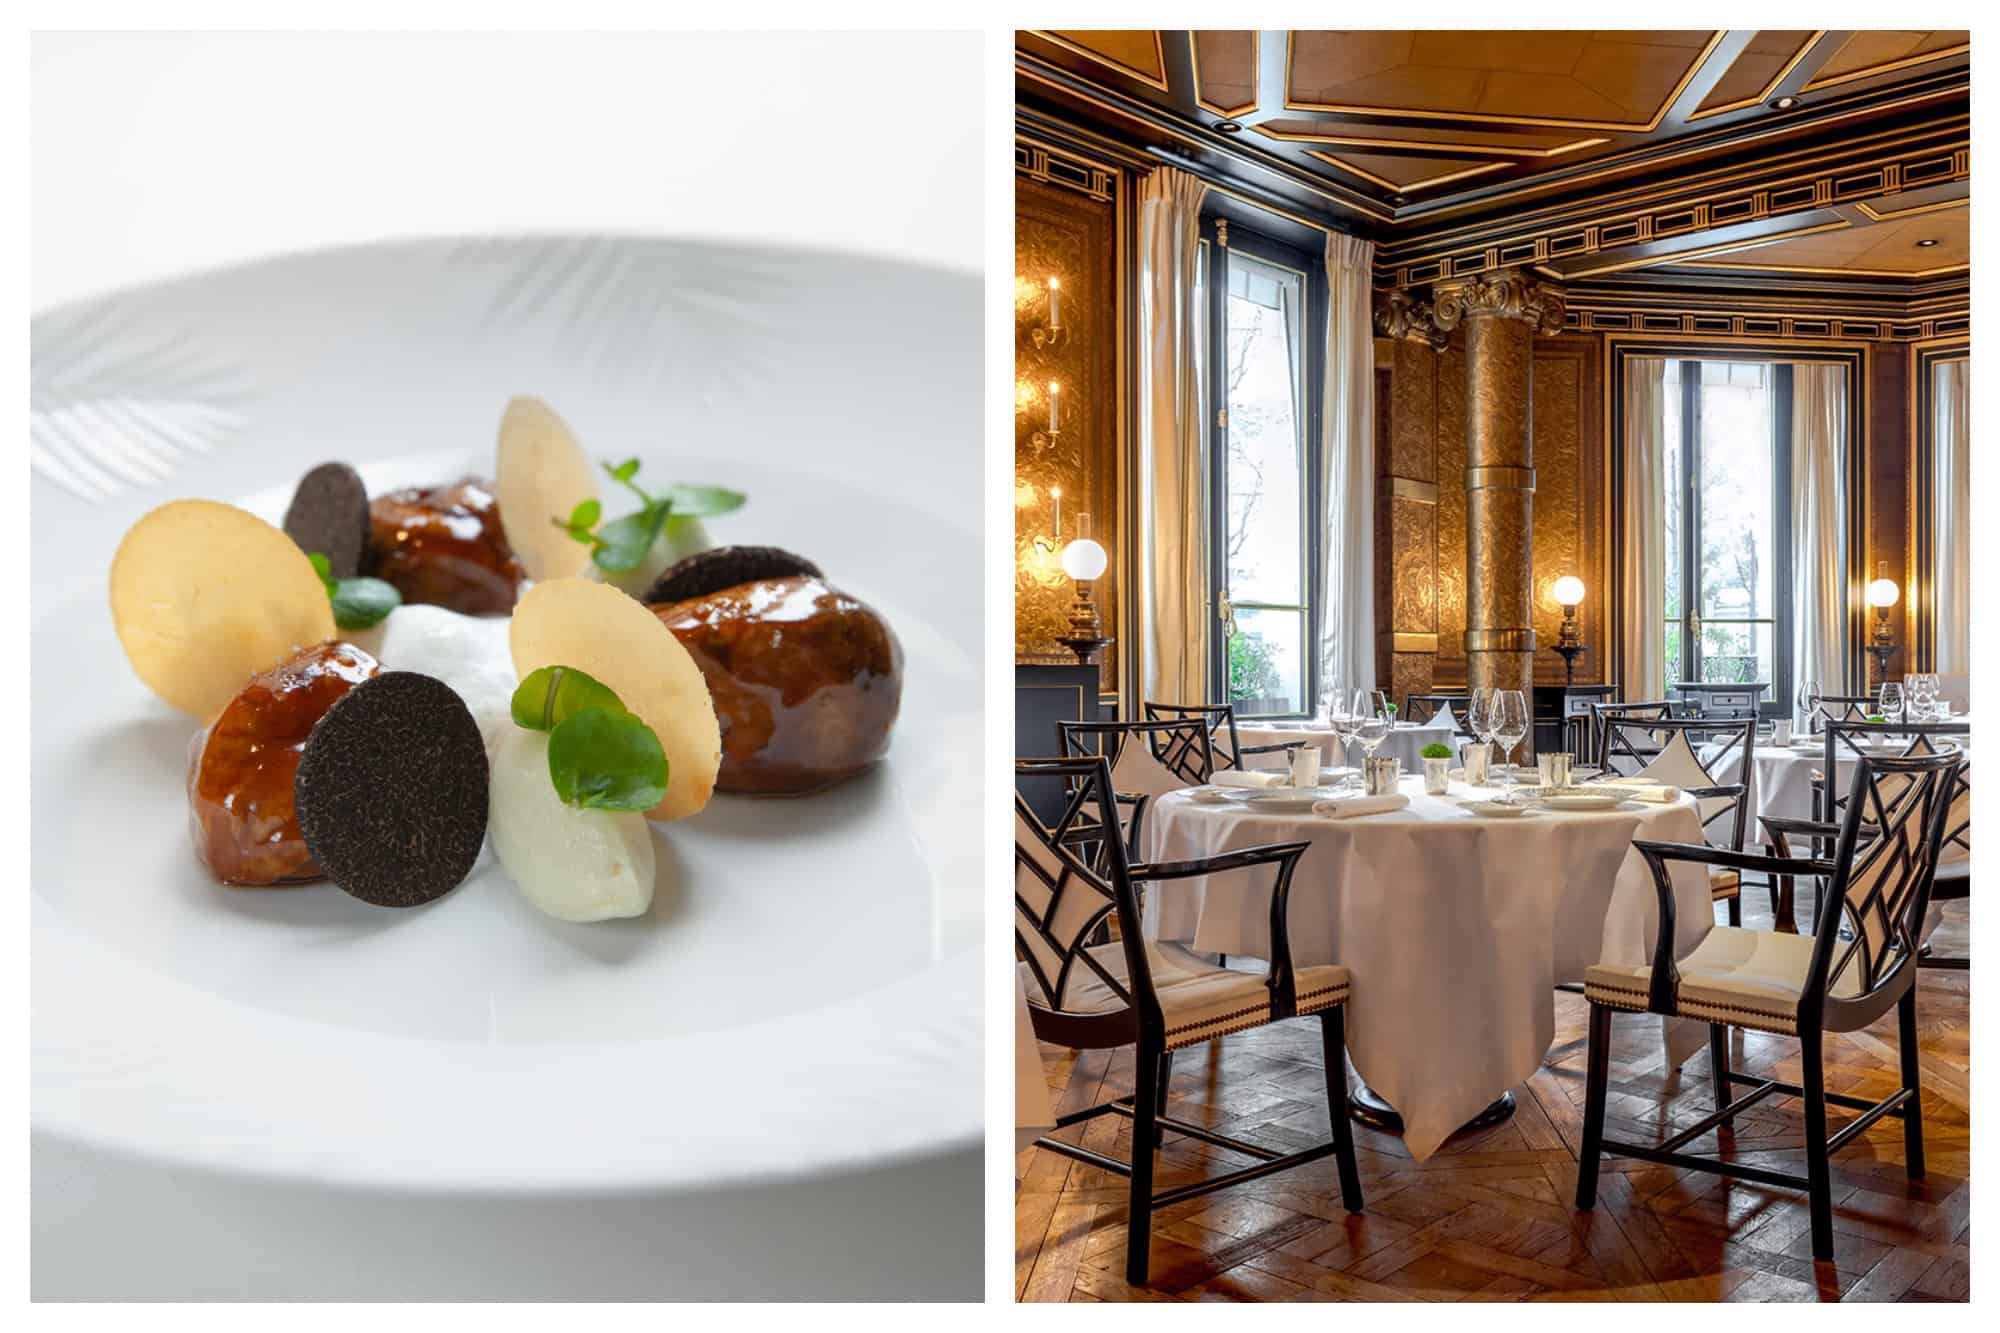 A plate of food from the restaurant Le Gabriel in Paris (left). The opulent interior of Le Gabriel, tables with white tablecloths, napkins and wine glasses, black and white Art Deco style chairs, in a room with gold walls and wood panelled roof in Art Deco style (right).